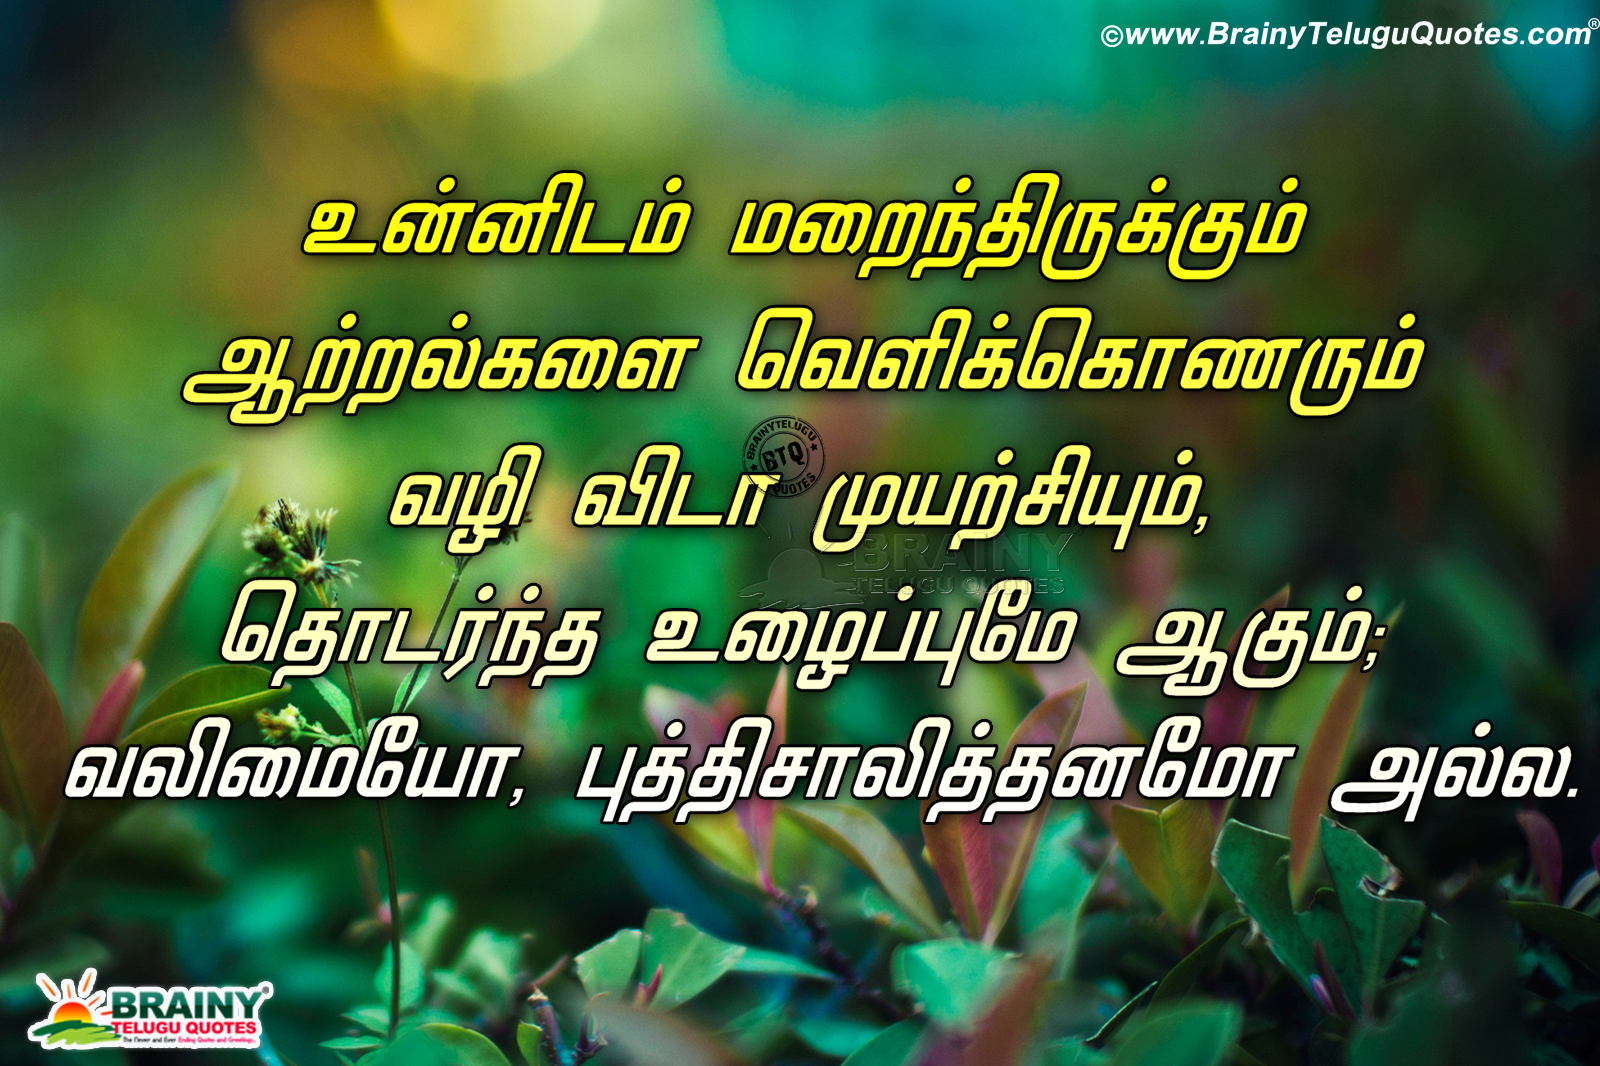 Famous Online Tamil Inspirational Quotes hd wallpapers Free Download